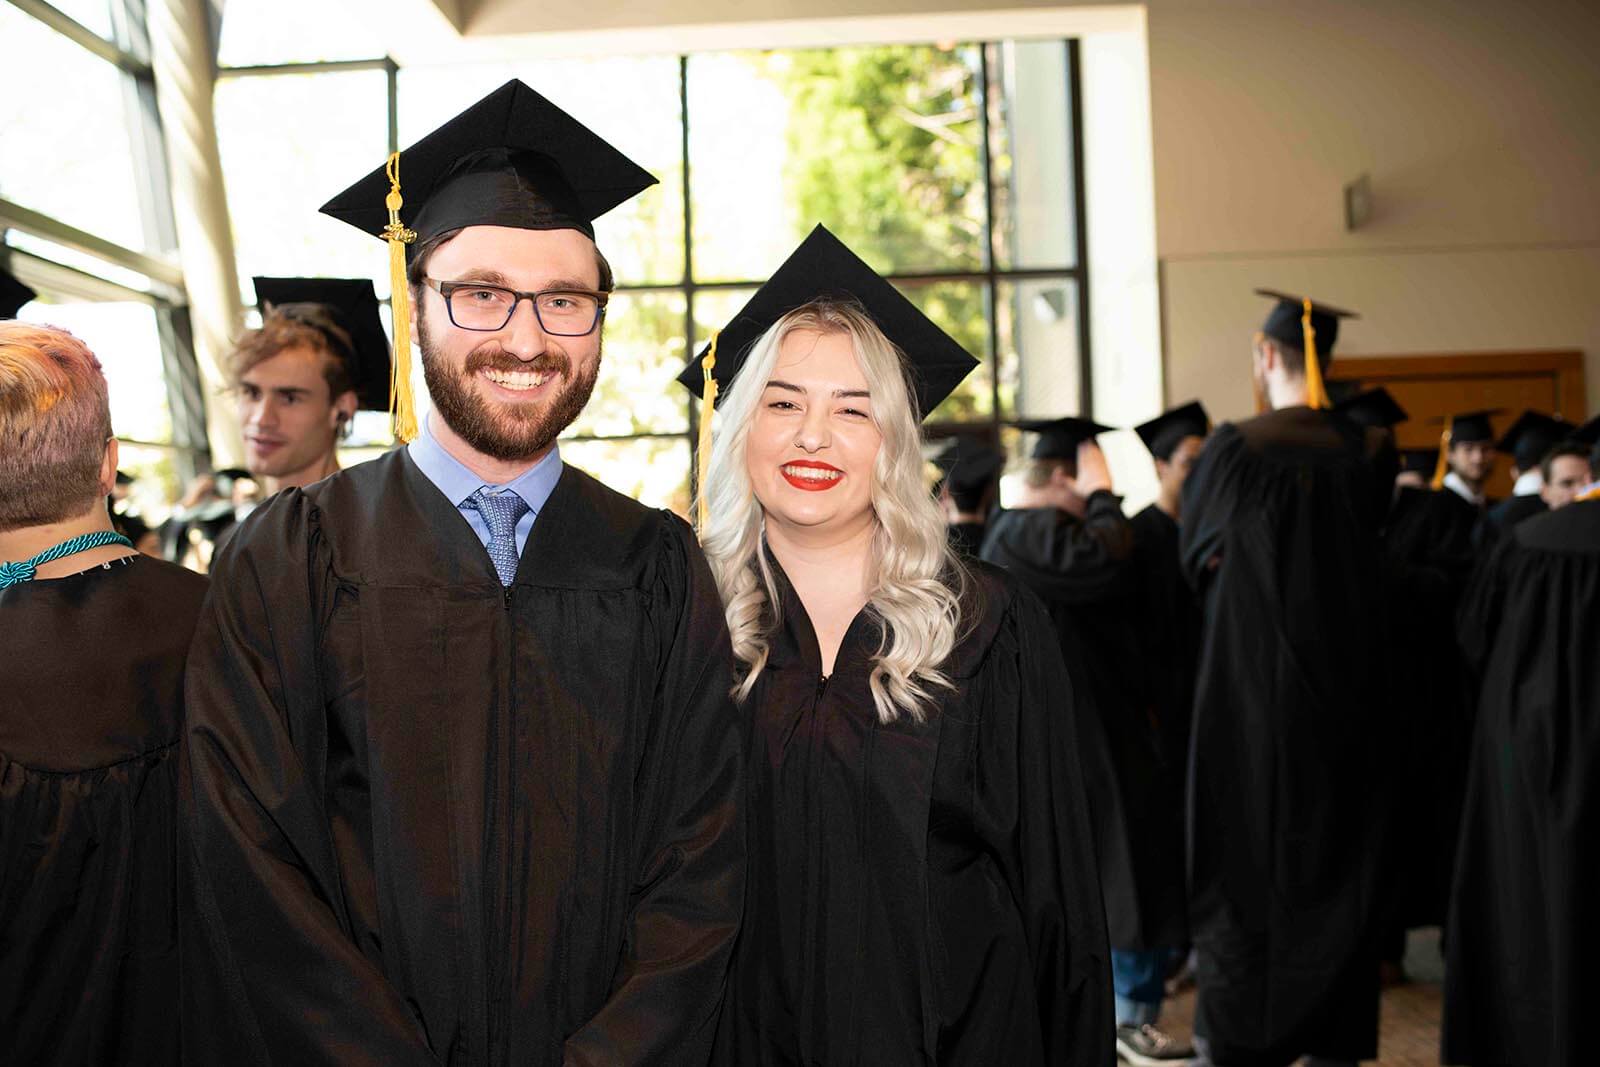 Two students in graduate robes and mortarboards smile for a photo in a convention center lobby.